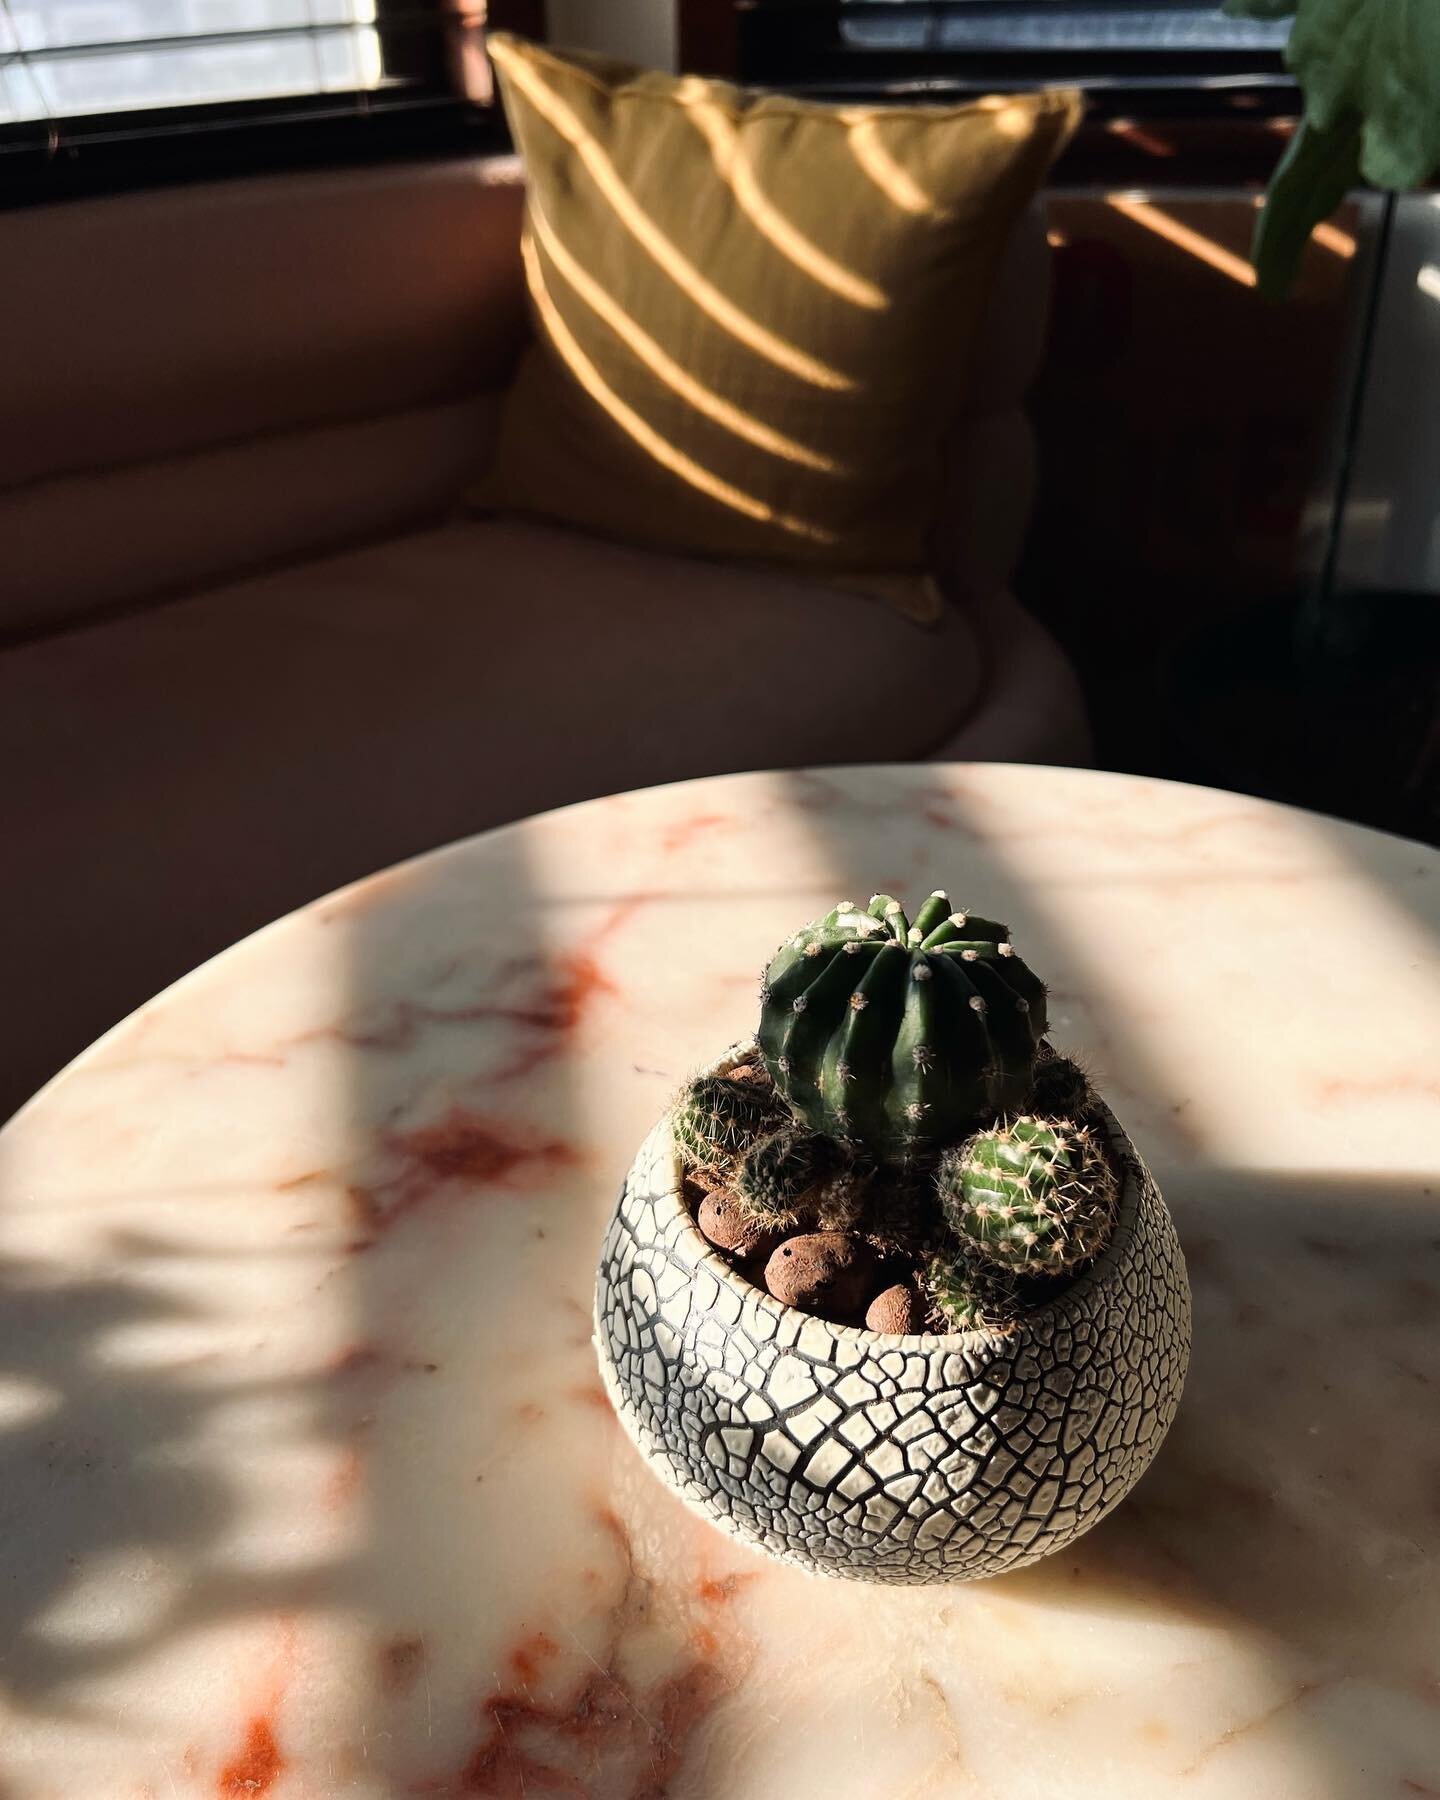 love making cool homes for my plant friends 🌵 
#clay #ceramics #wheelthrown #cactus